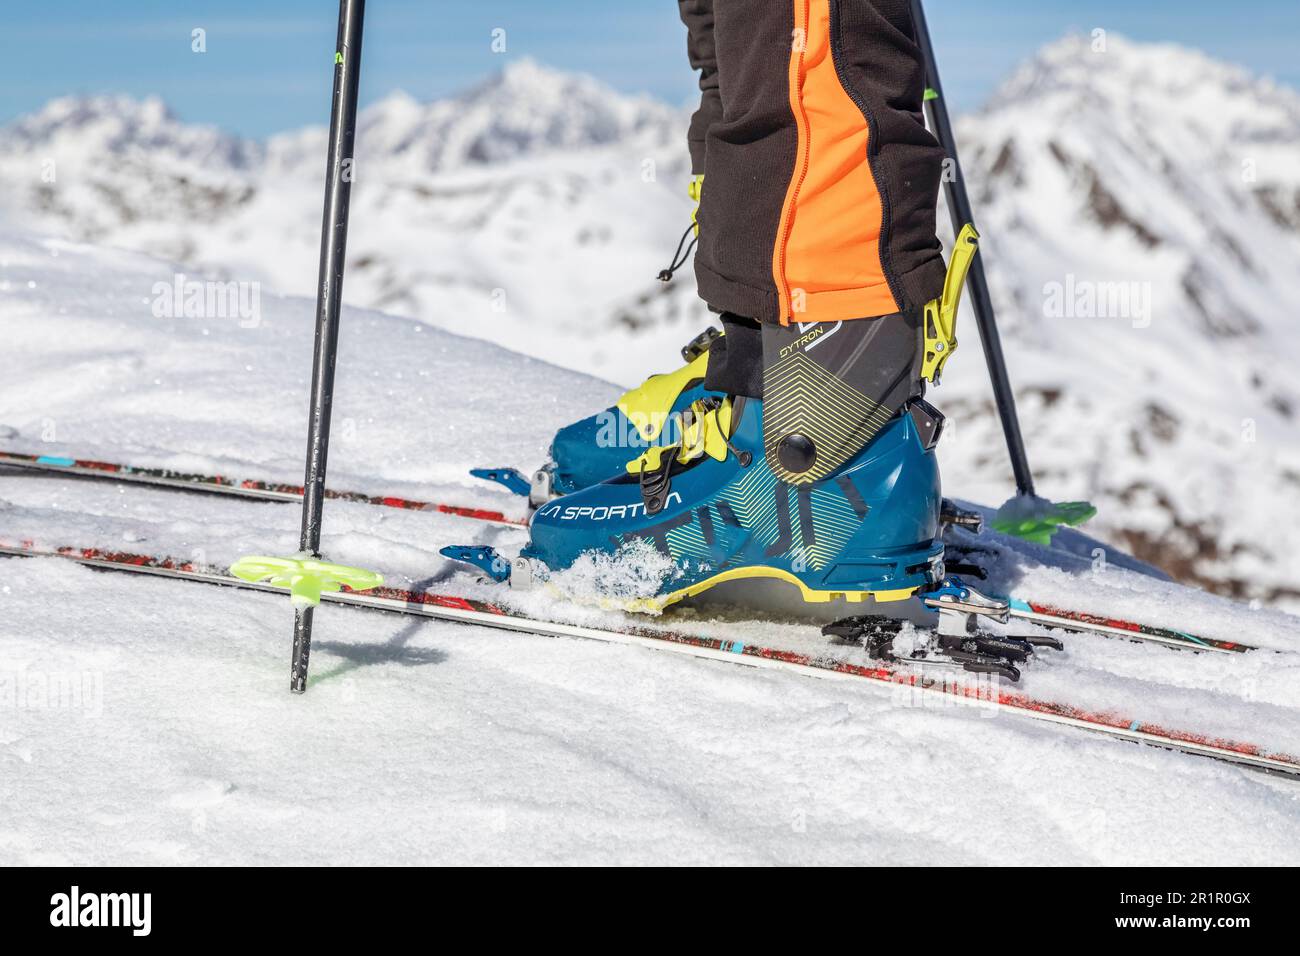 Austria, East Tyrol, Villgraten valley, Western Tauern Alps, detail on technical ski mountaineering equipment, boots, bindings and skis Stock Photo